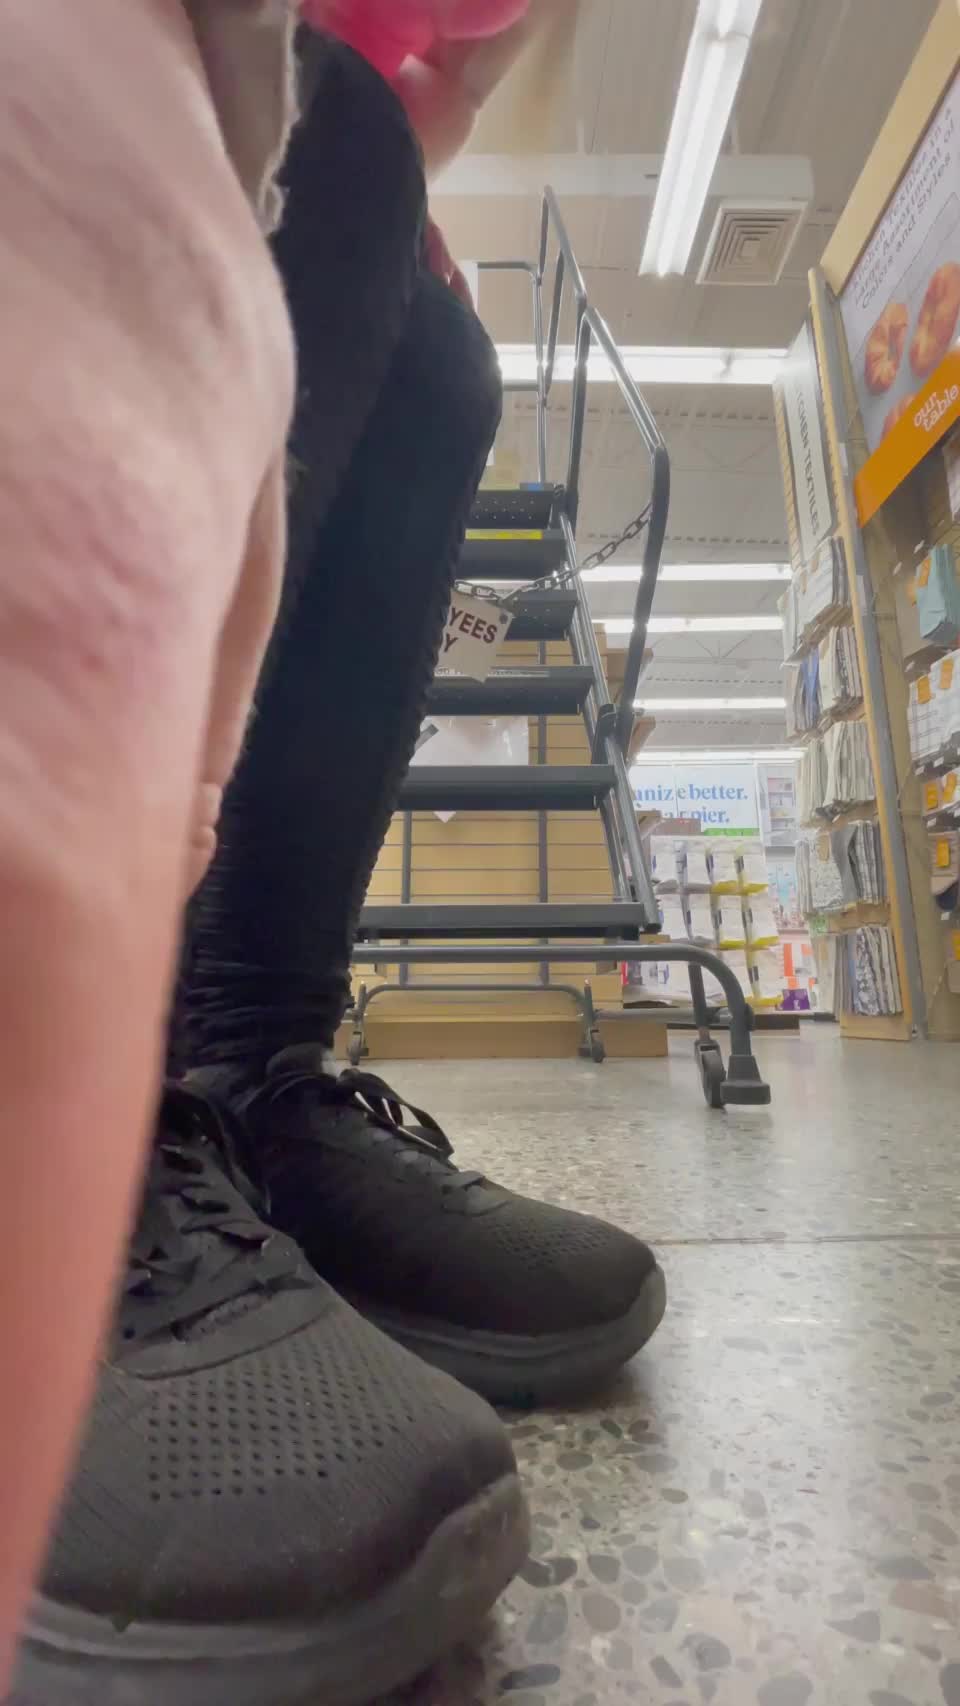 Had a chance to film a fun little flash at the mall 😉 [gif]